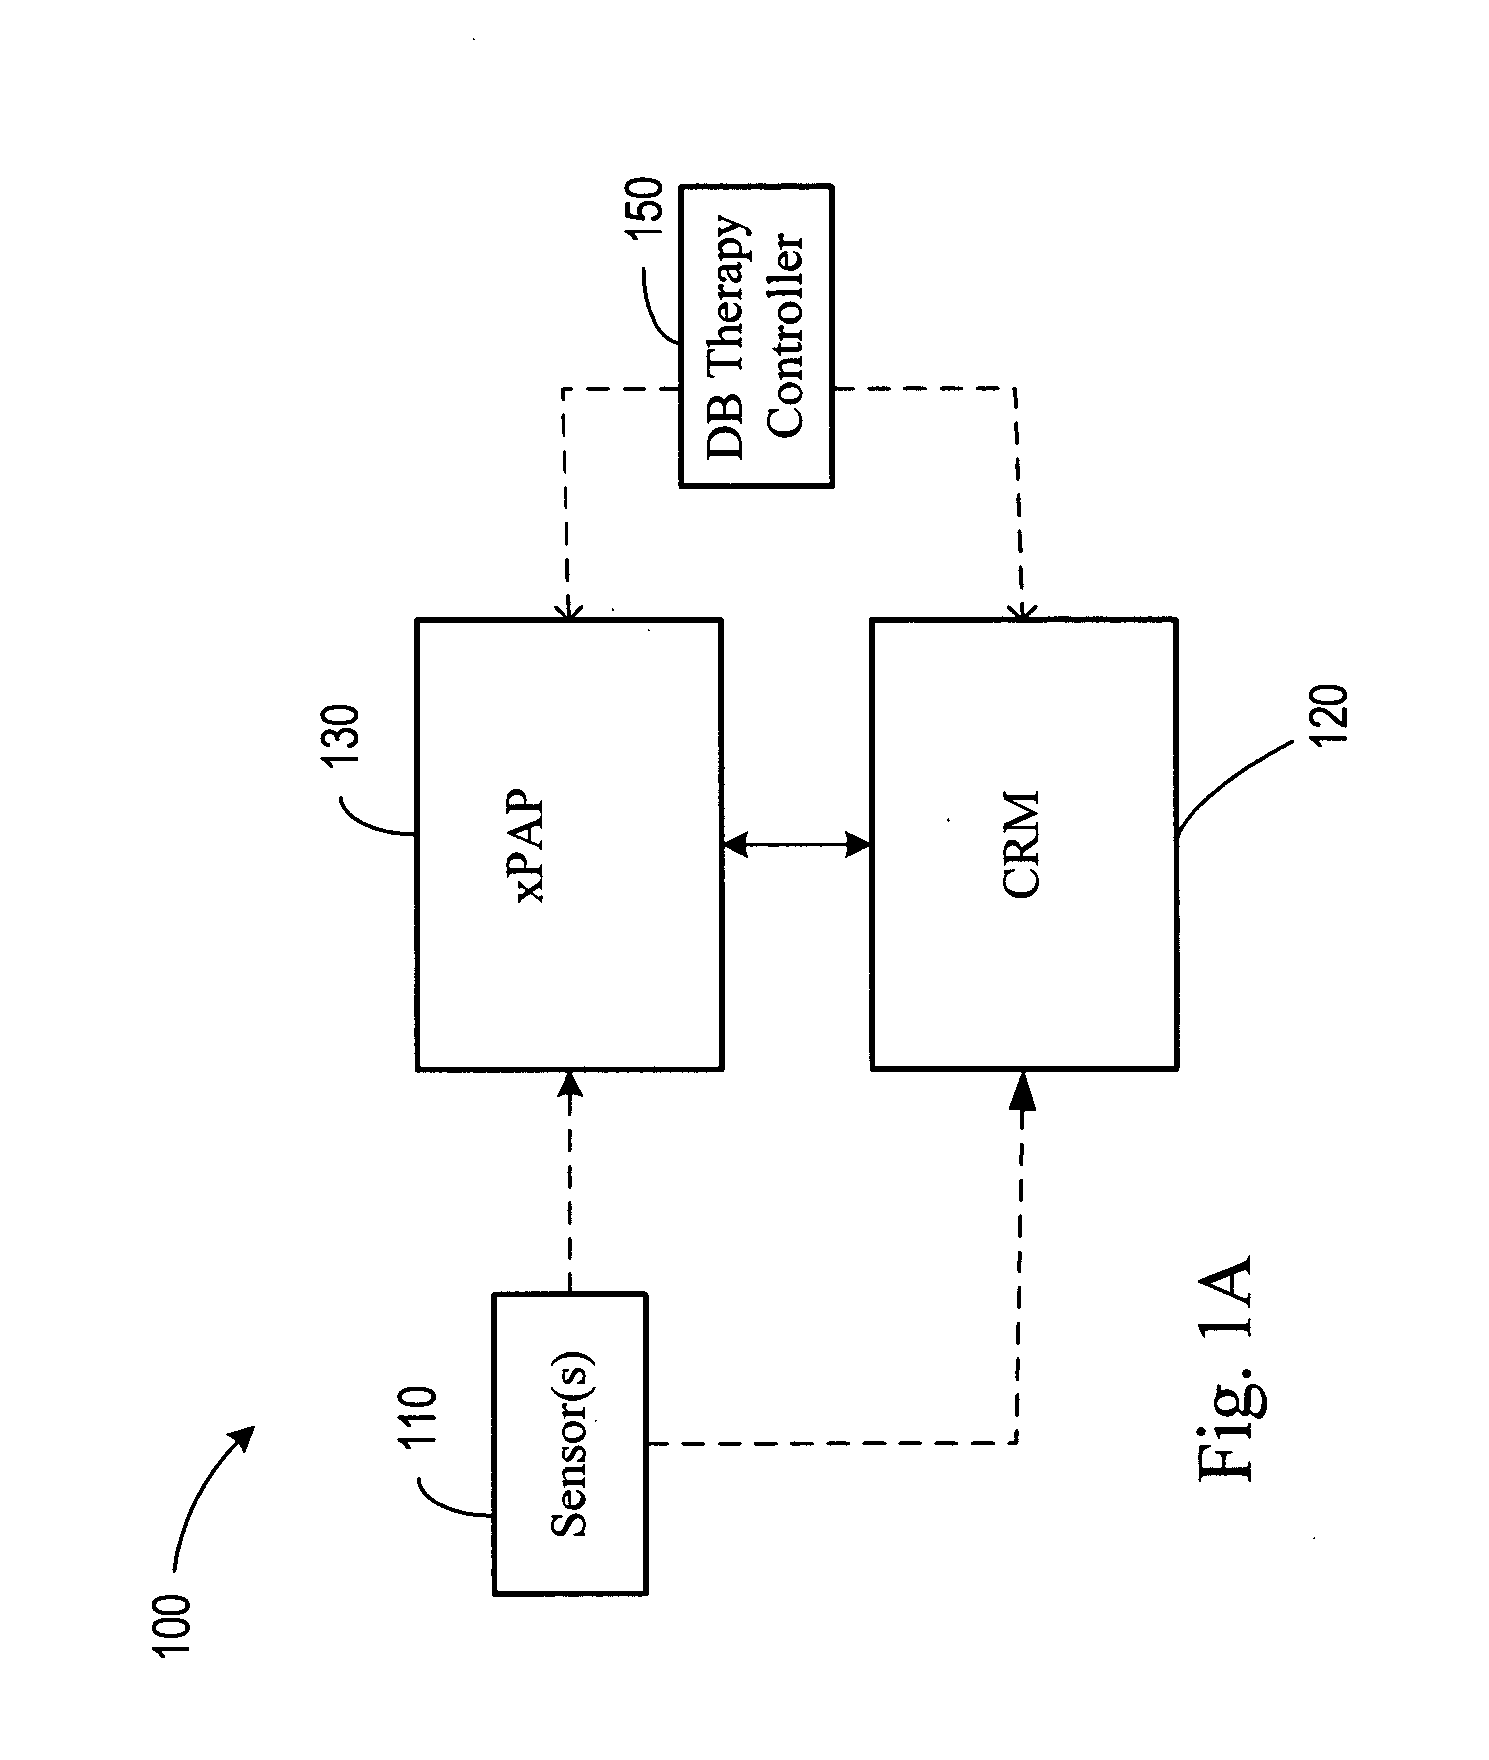 Diagnosis and/or therapy using blood chemistry/expired gas parameter analysis